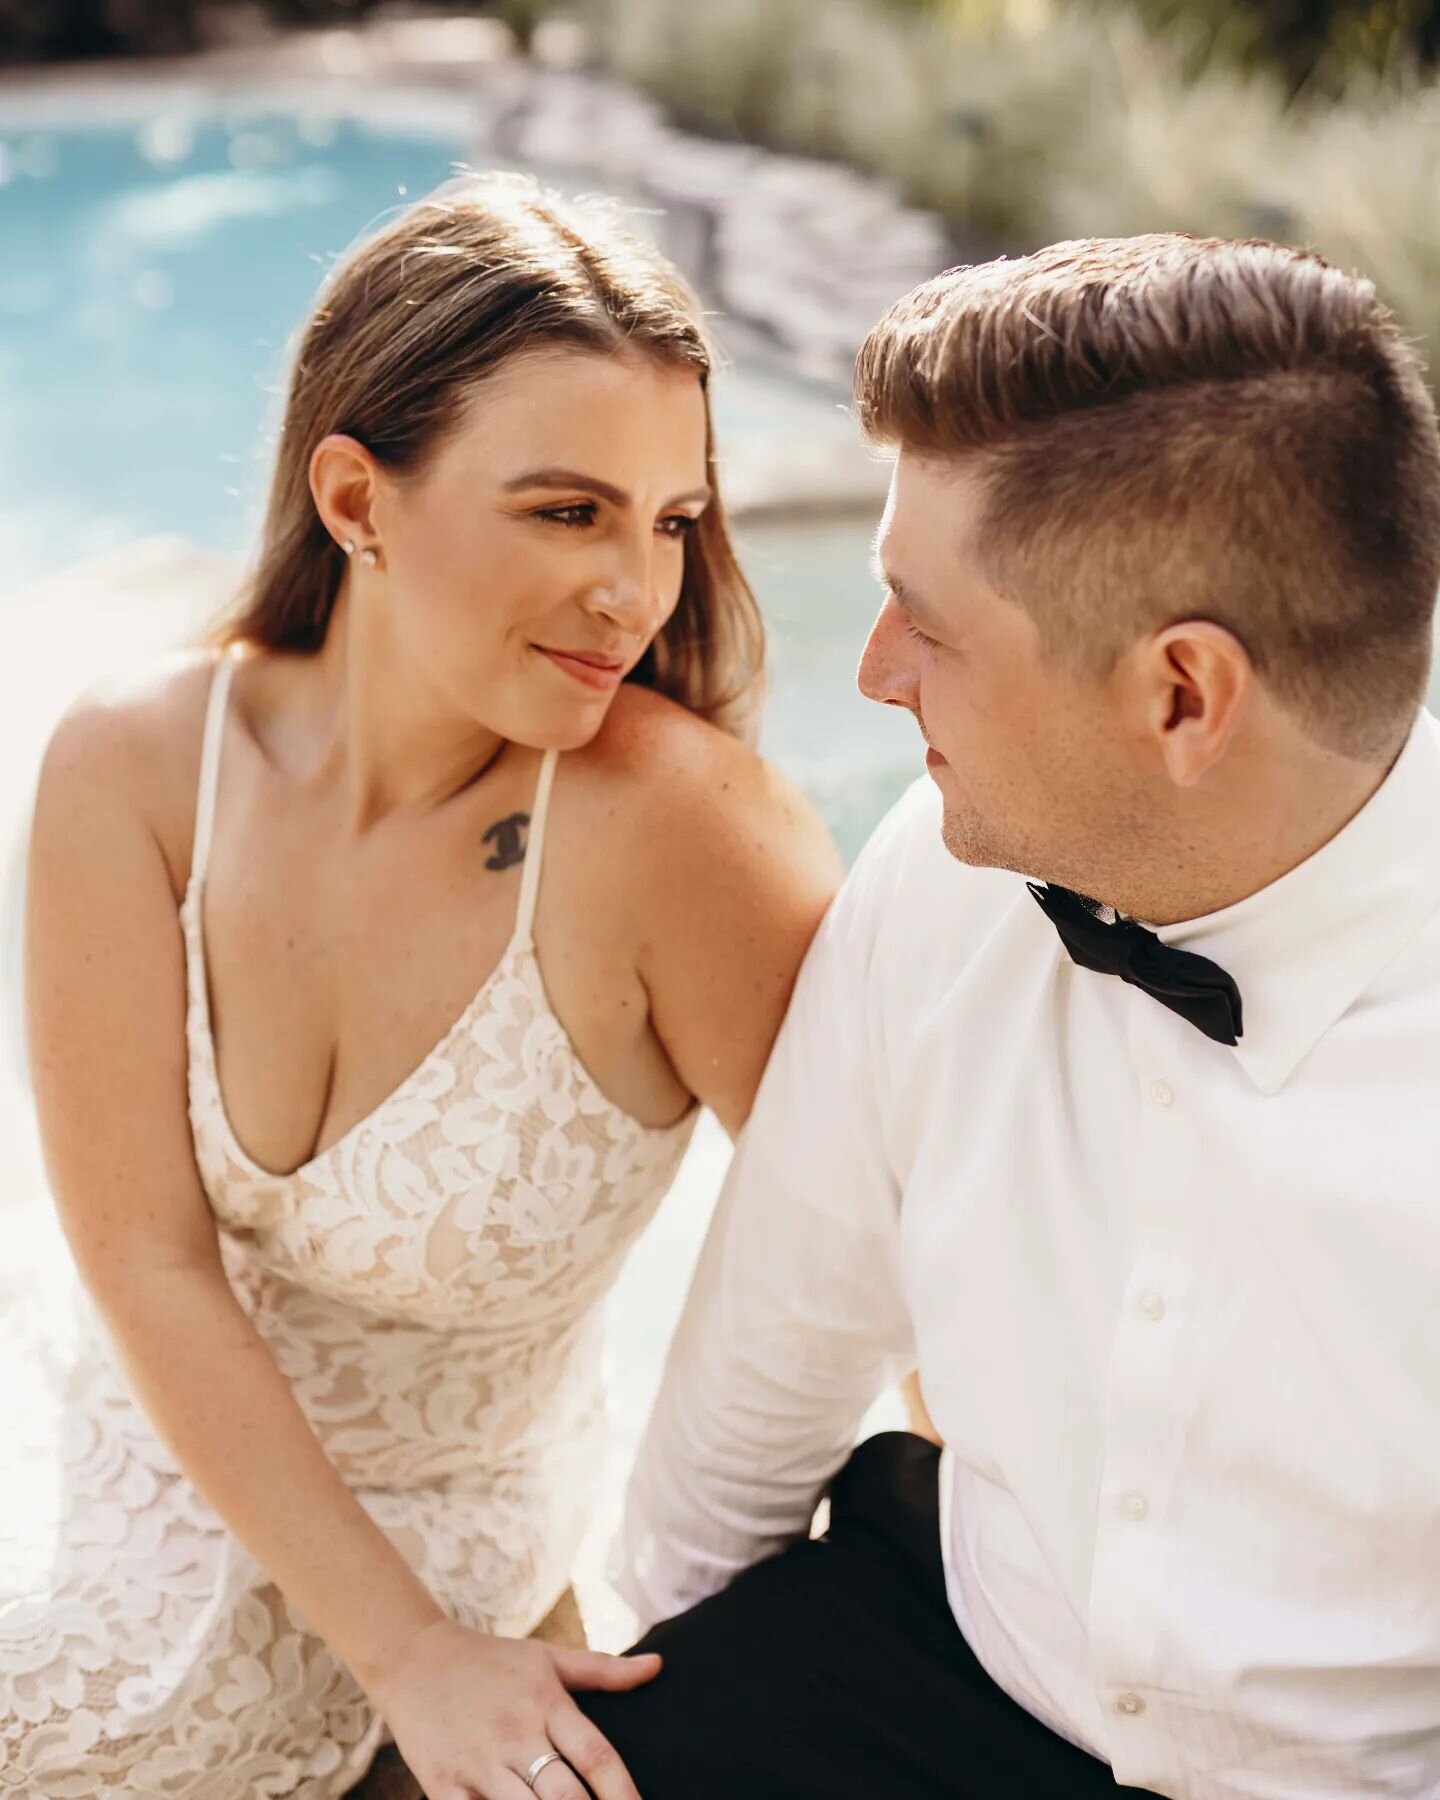 Intimate affairs are always some of my favorites. Backyard weddings take the cake for some of the most care free and fun ways to celebrate nuptials. The icing on this cake? My couple took a dive right into the pool after sharing their first bites of 